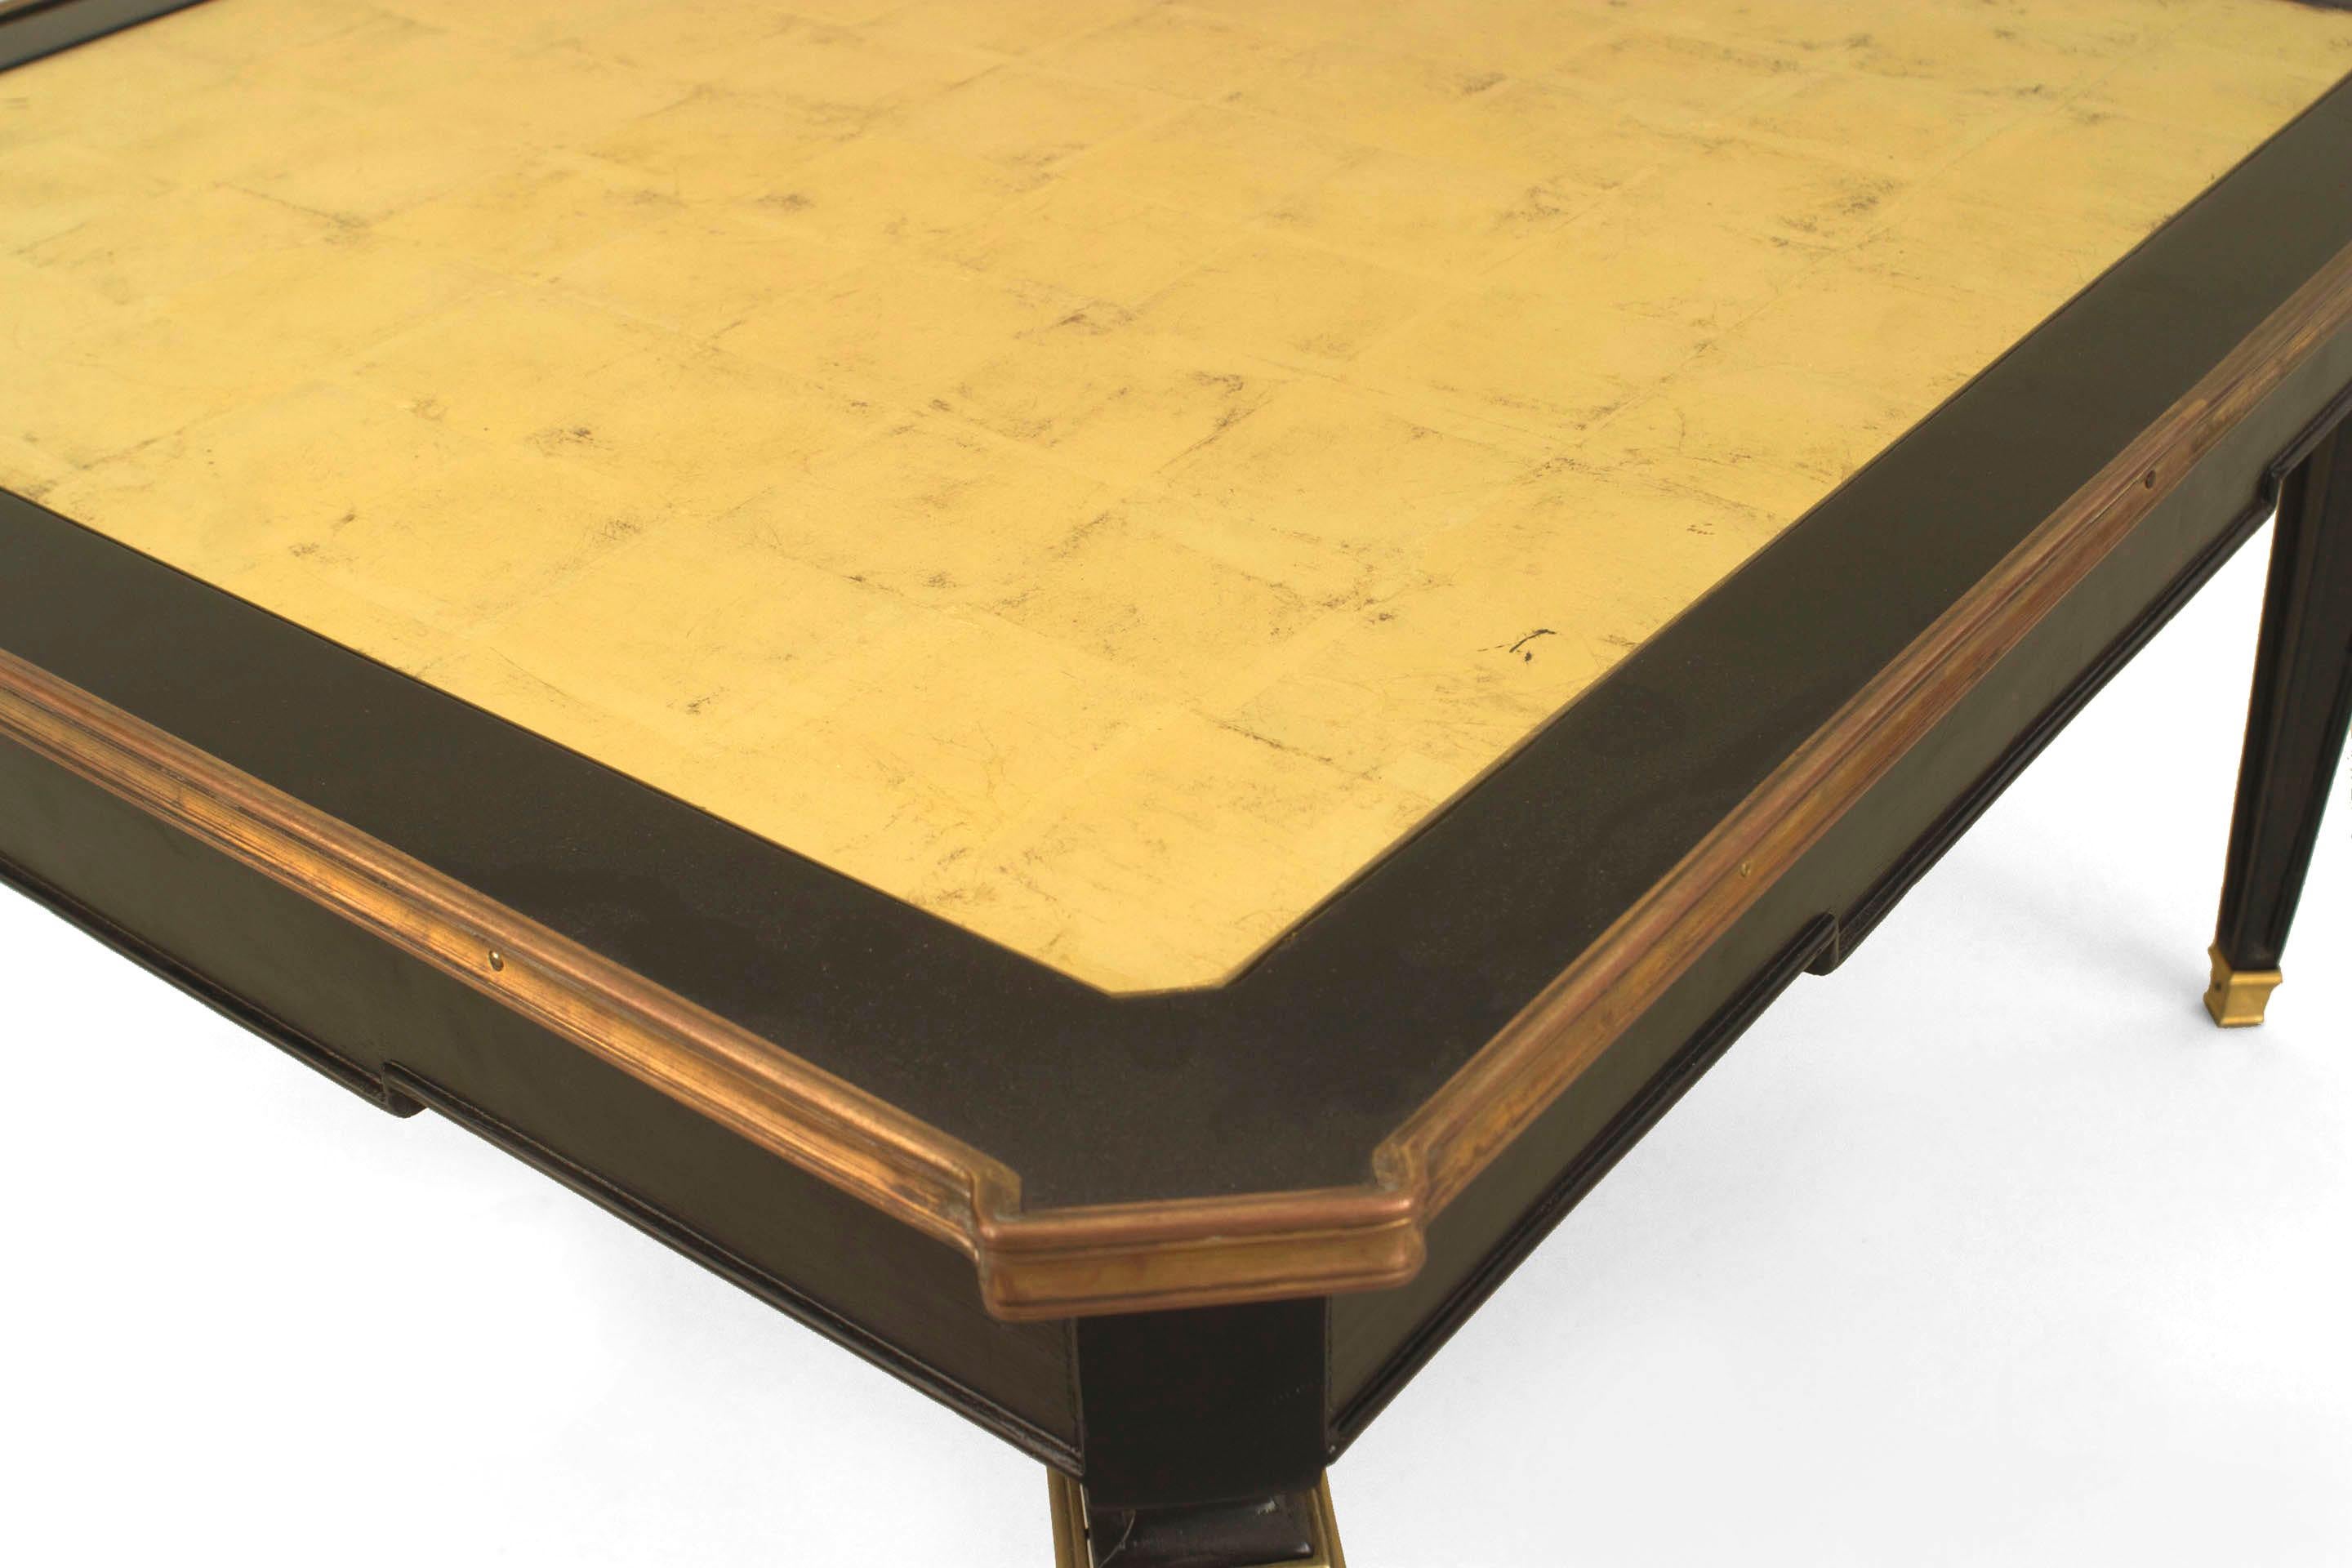 2 French Mid-Century (1940s) ebonized square coffee tables with a gilt bronze rim and trim with a gold leaf inset top and tapered square legs. (MAISON JANSEN) (PRICED EACH)
